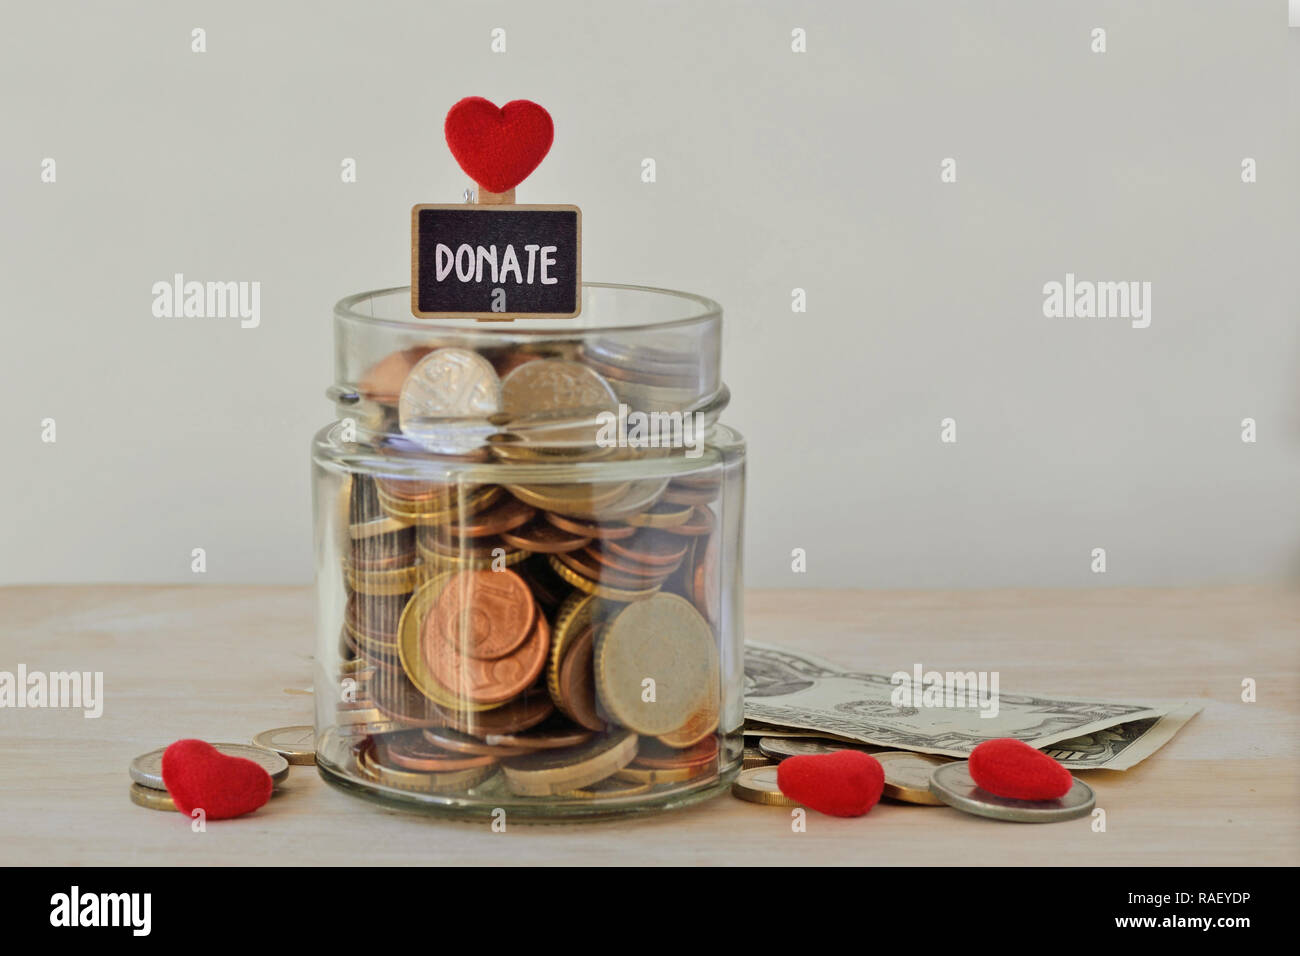 Money jar full of coins with Donate label and hearts - Charity concept Stock Photo